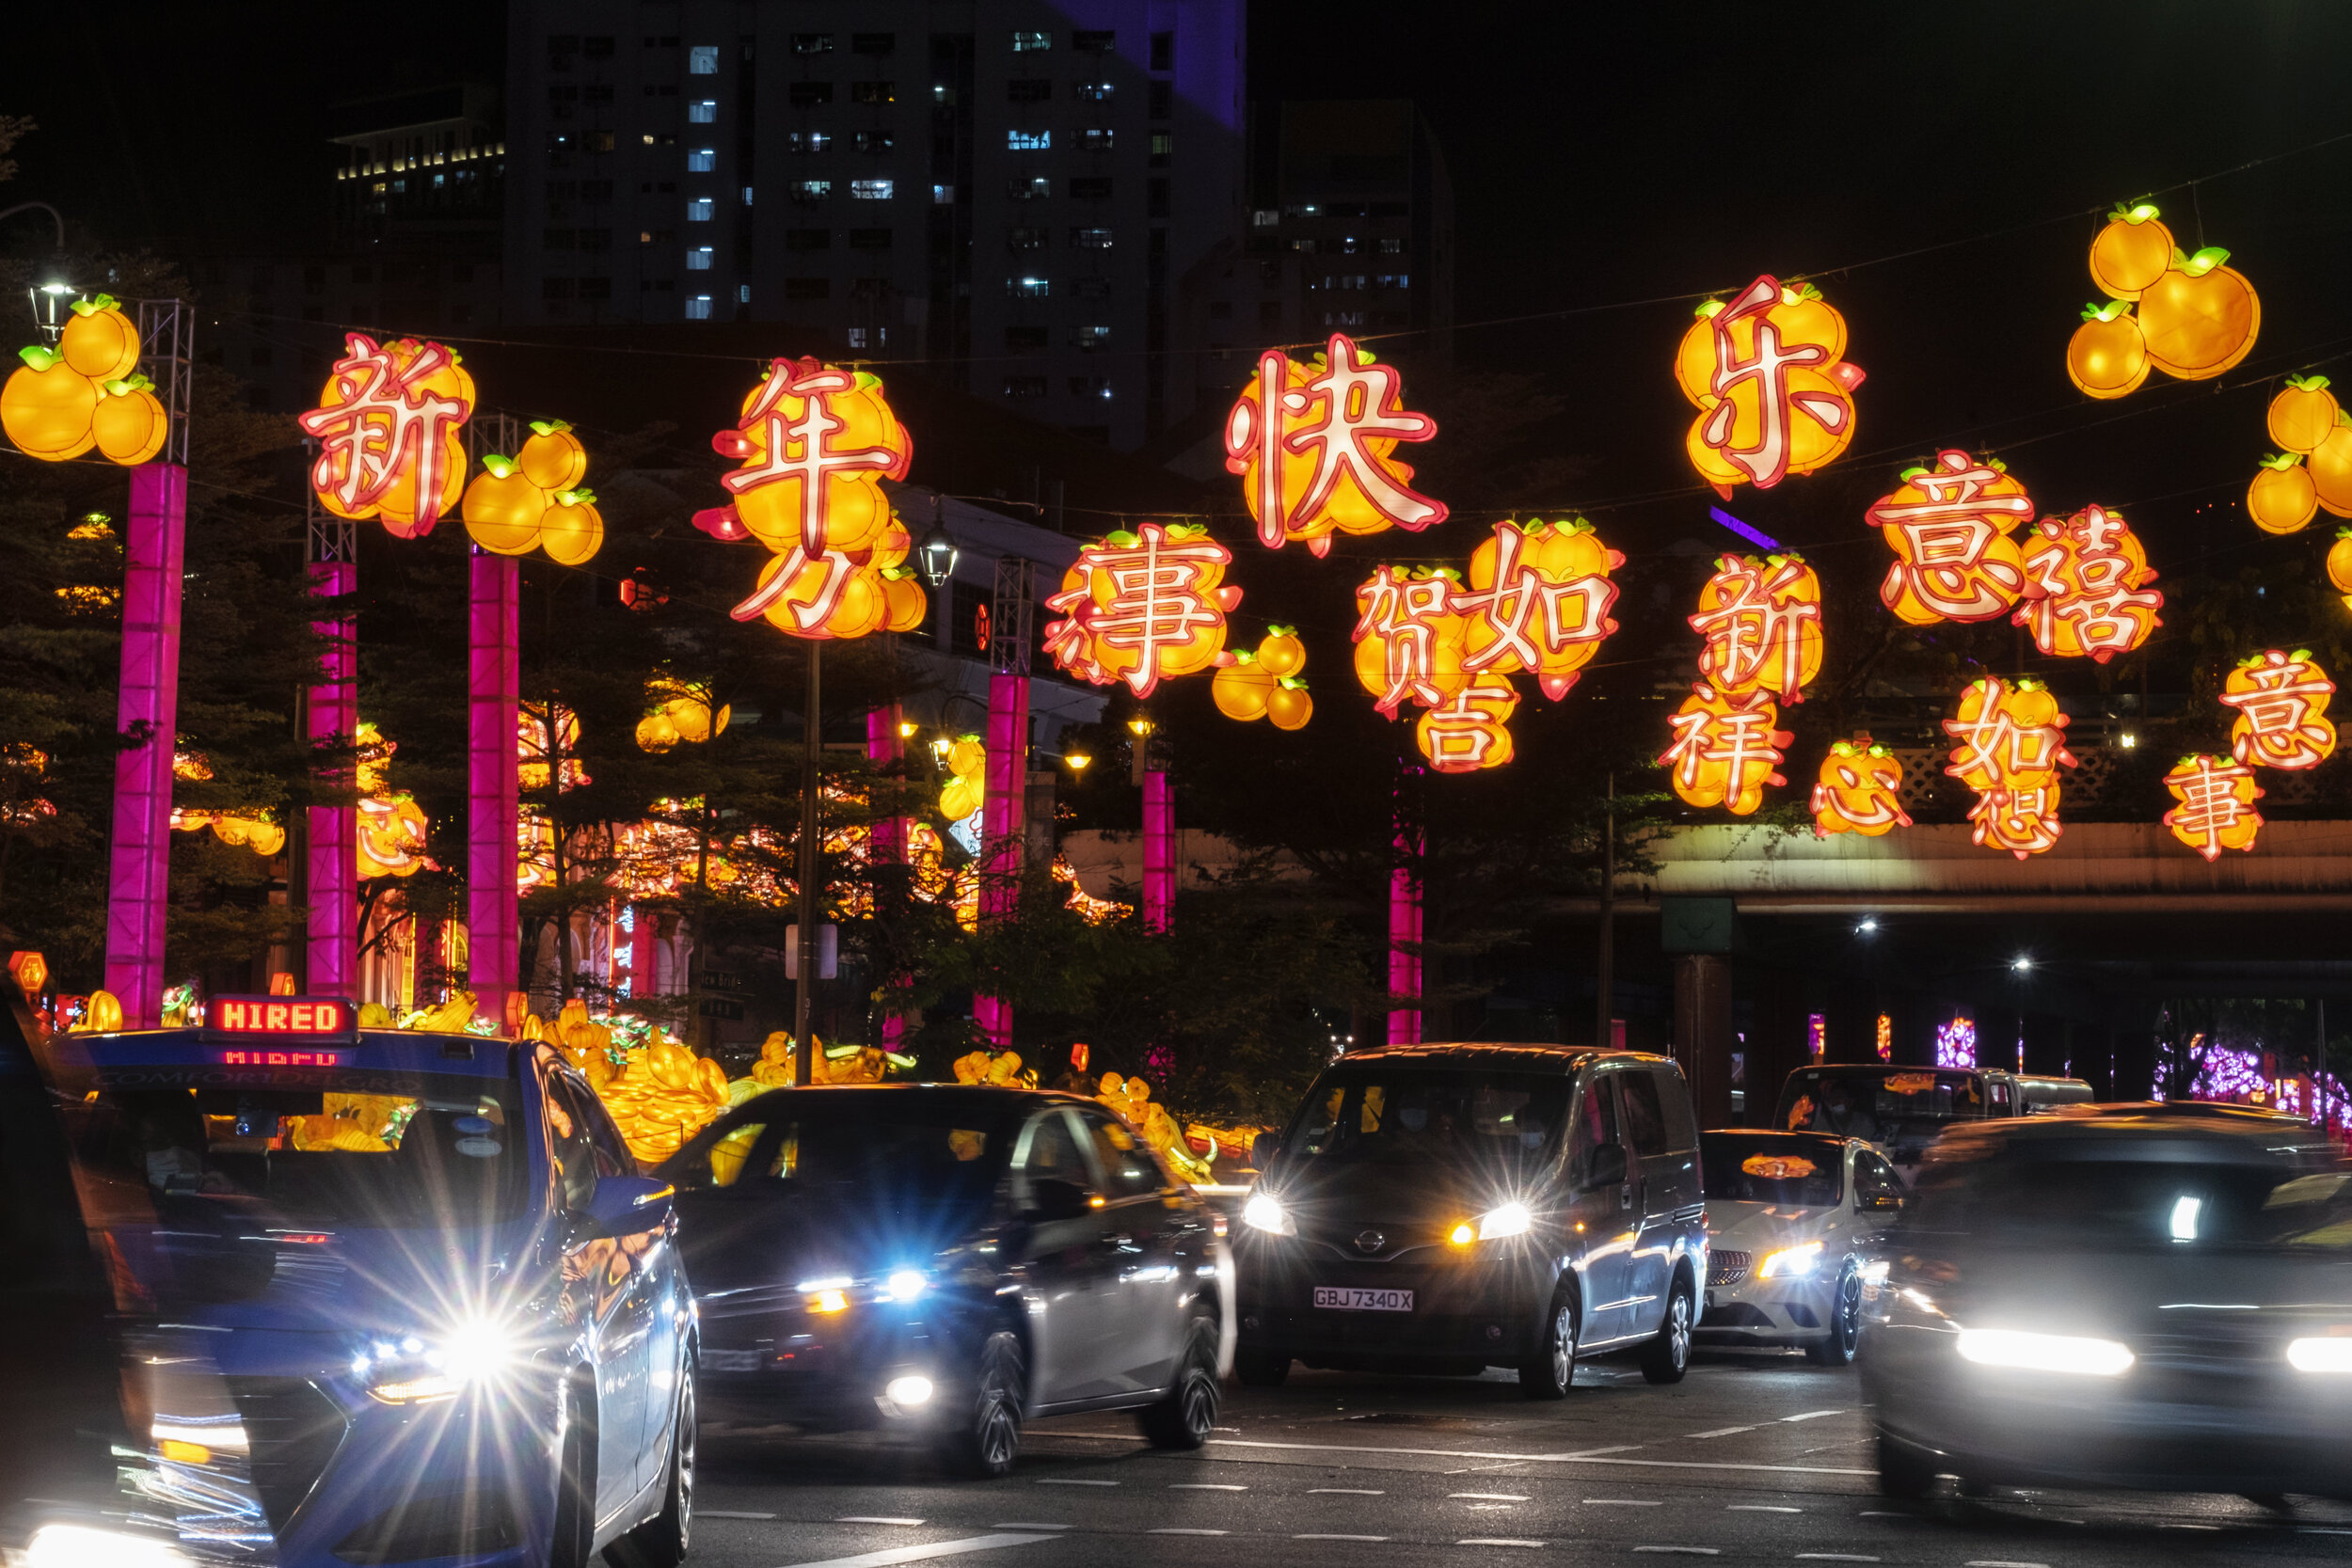  Lighting decorations of auspicious Chinese sayings hang above a road ahead of the Chinese Lunar New Year of the Ox, otherwise known as the Spring Festival, in Singapore's Chinatown, January 31, 2021. Picture taken with long exposure. REUTERS/Loriene